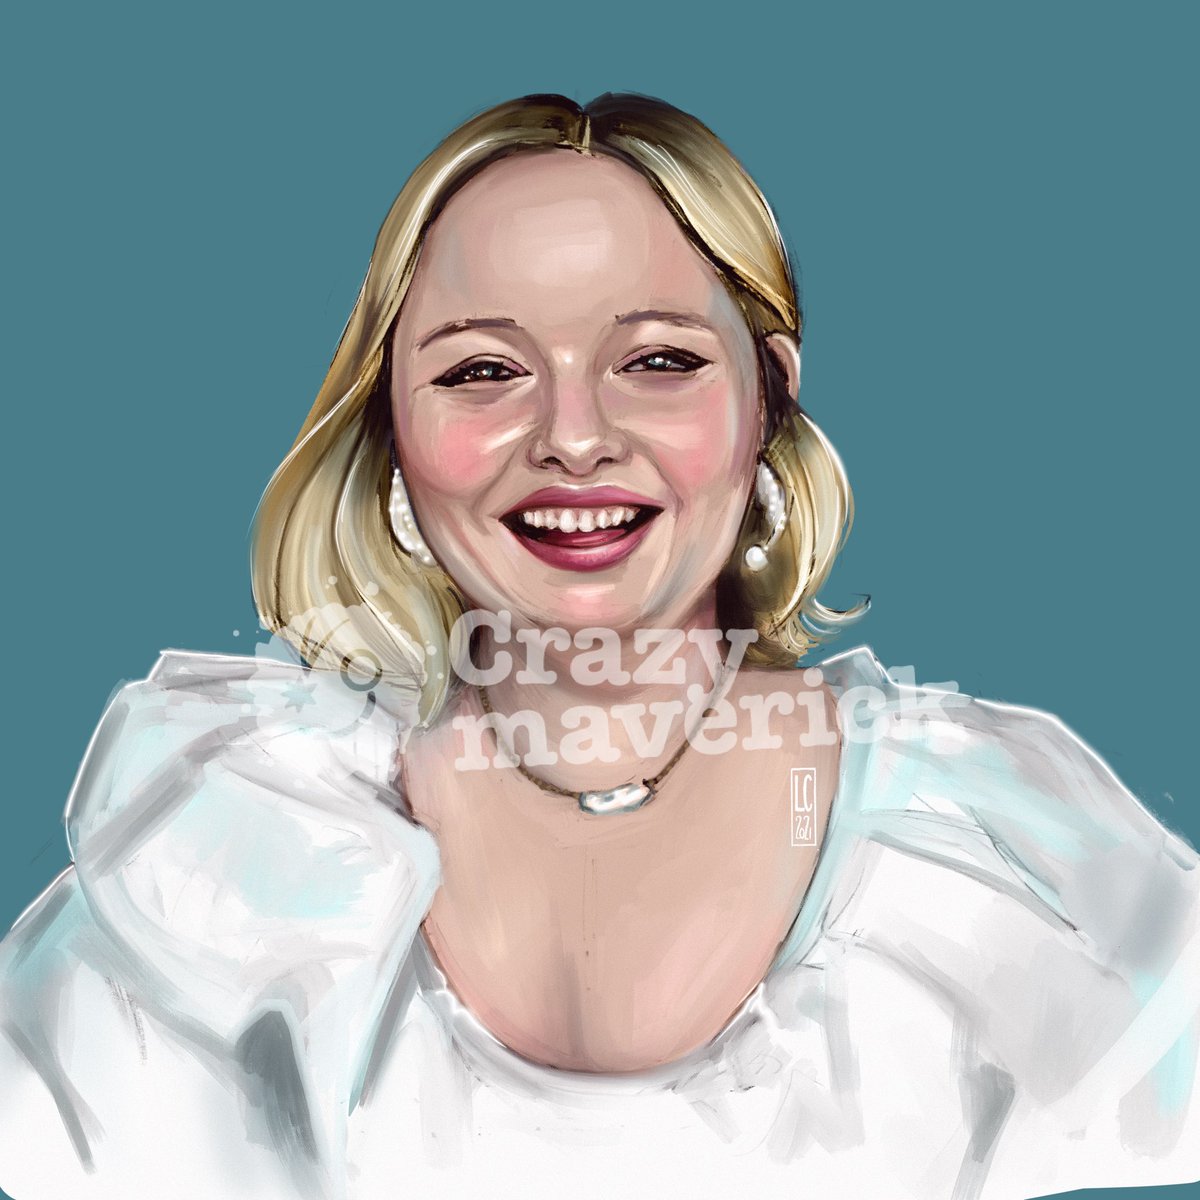 Digital portrait by our @Elece22 for the #portraitartistoftheweek @skytv We are fan of the talented @nicolacoughlan and her smile and laughing, more people like her please! 
#mypaotw #portrait @Procreate